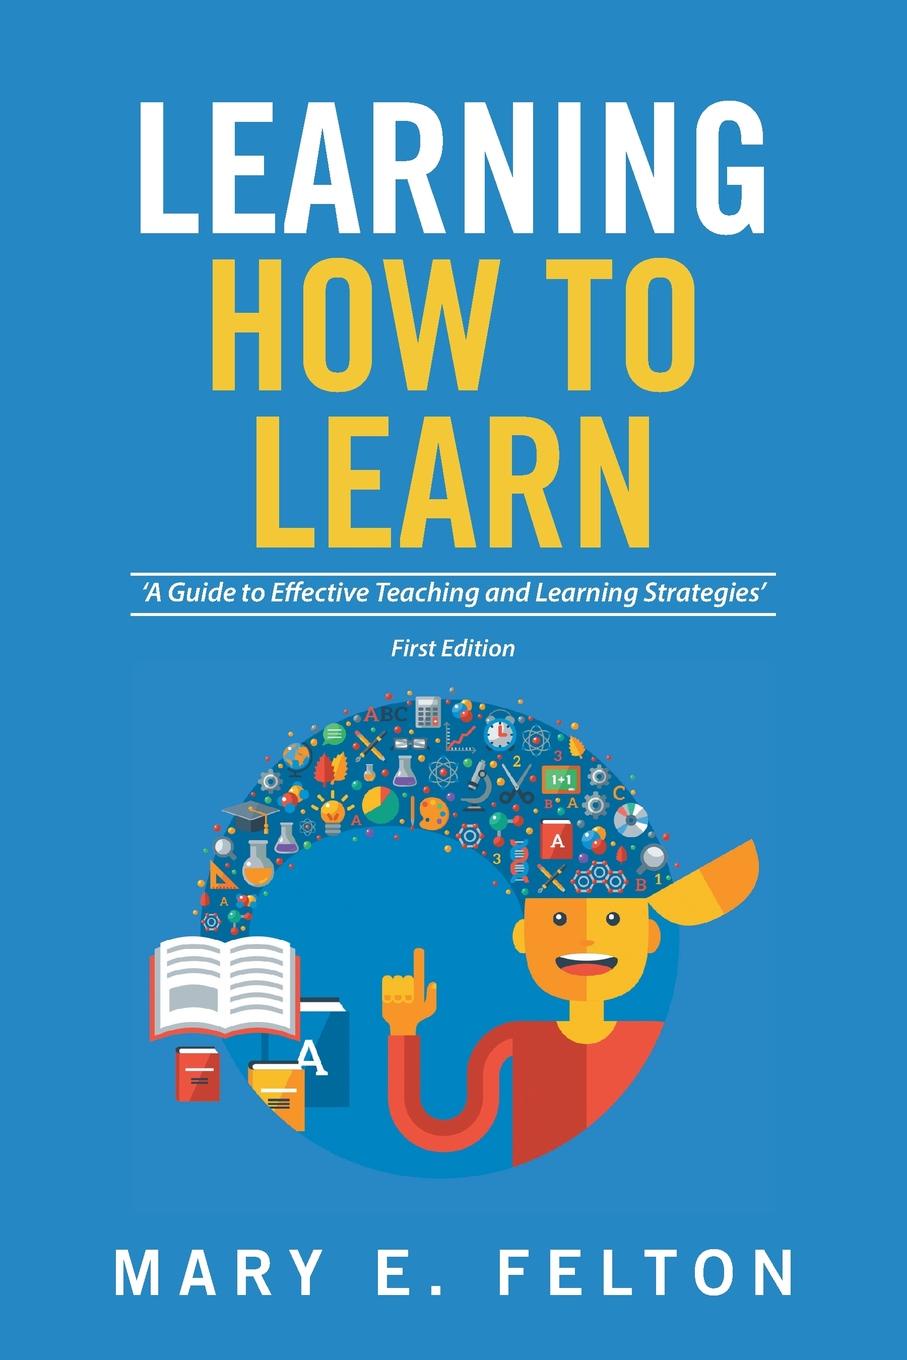 Learning How to Learn. .A Guide to Effective Teaching and Learning Strategies.